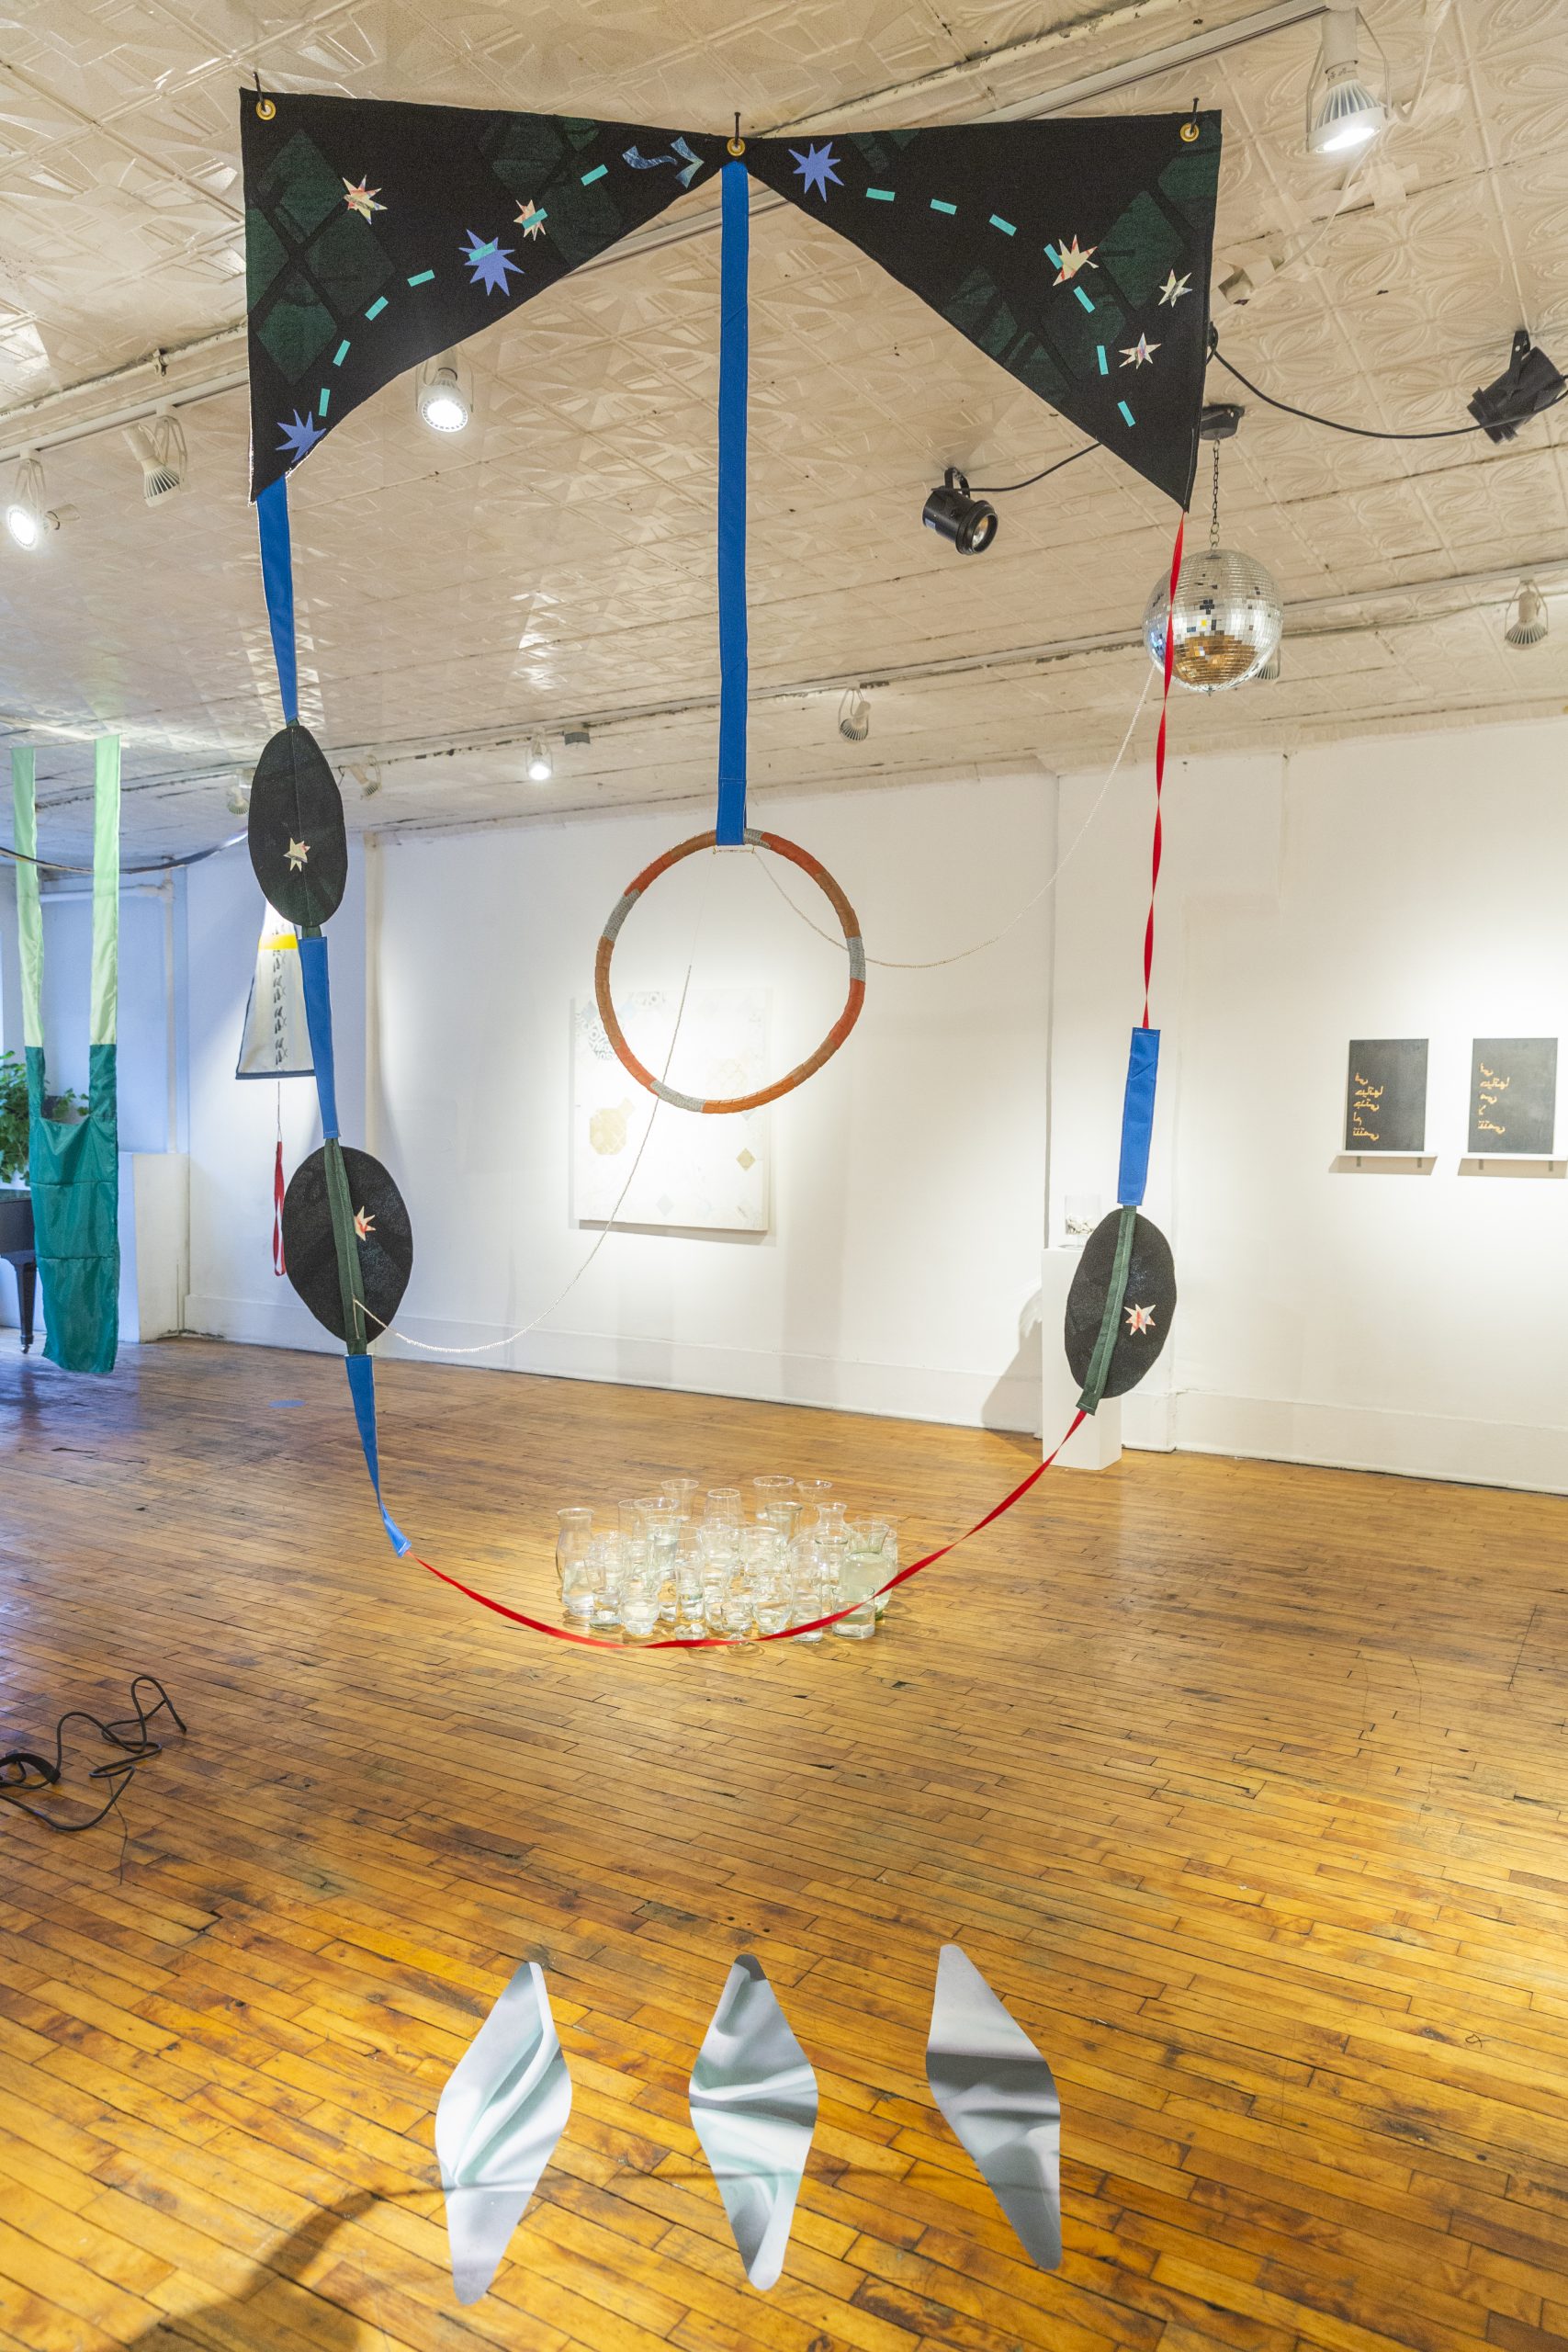 Image: "Beckon" (te Ilamo)" by Yesenia Bell, gallery view. There is a circular shape in the center with fabric hanging from the ceiling circling it. The artist has sewn stars into the top, which is a dark grey, black color. In the background is the remainder of the gallery. Photo by Guanyu Xu.